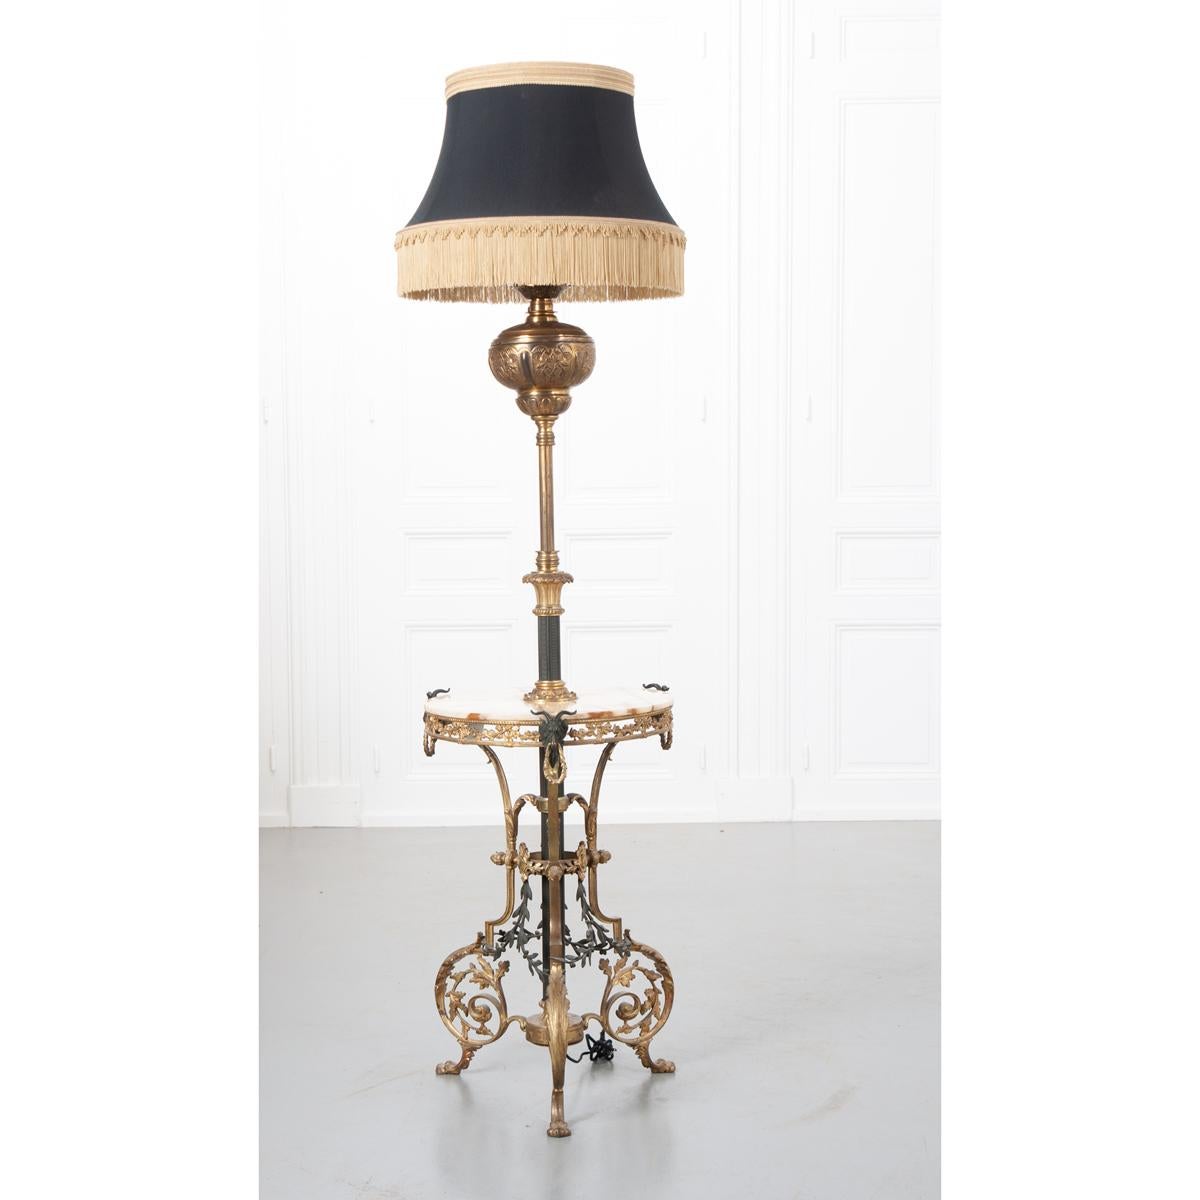 English Victorian 19th Century Lamp and Table